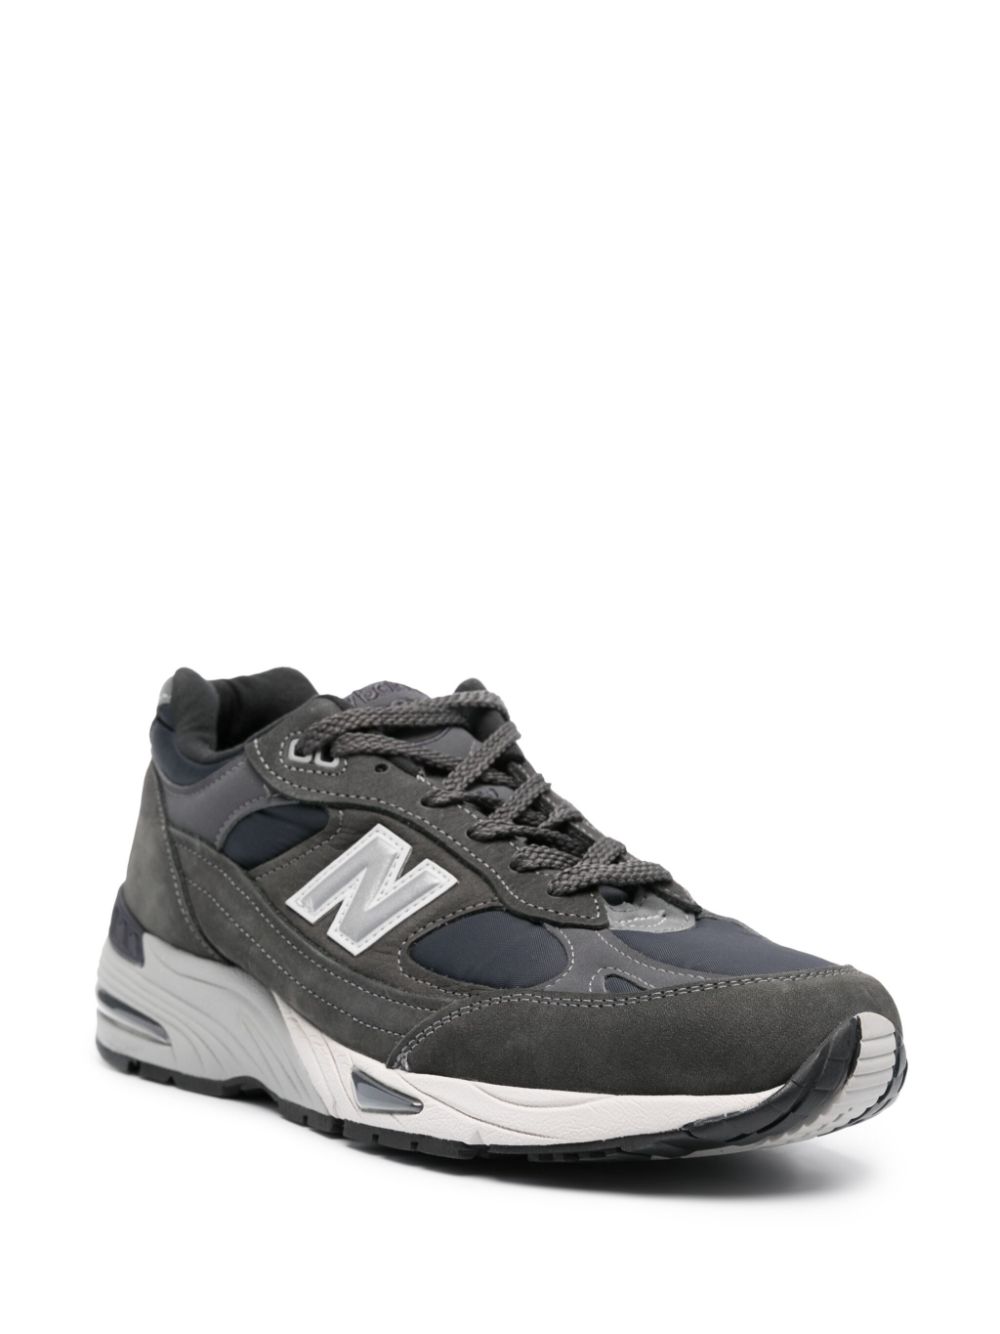 New Balance Made in UK 991v1 sneakers - Grijs